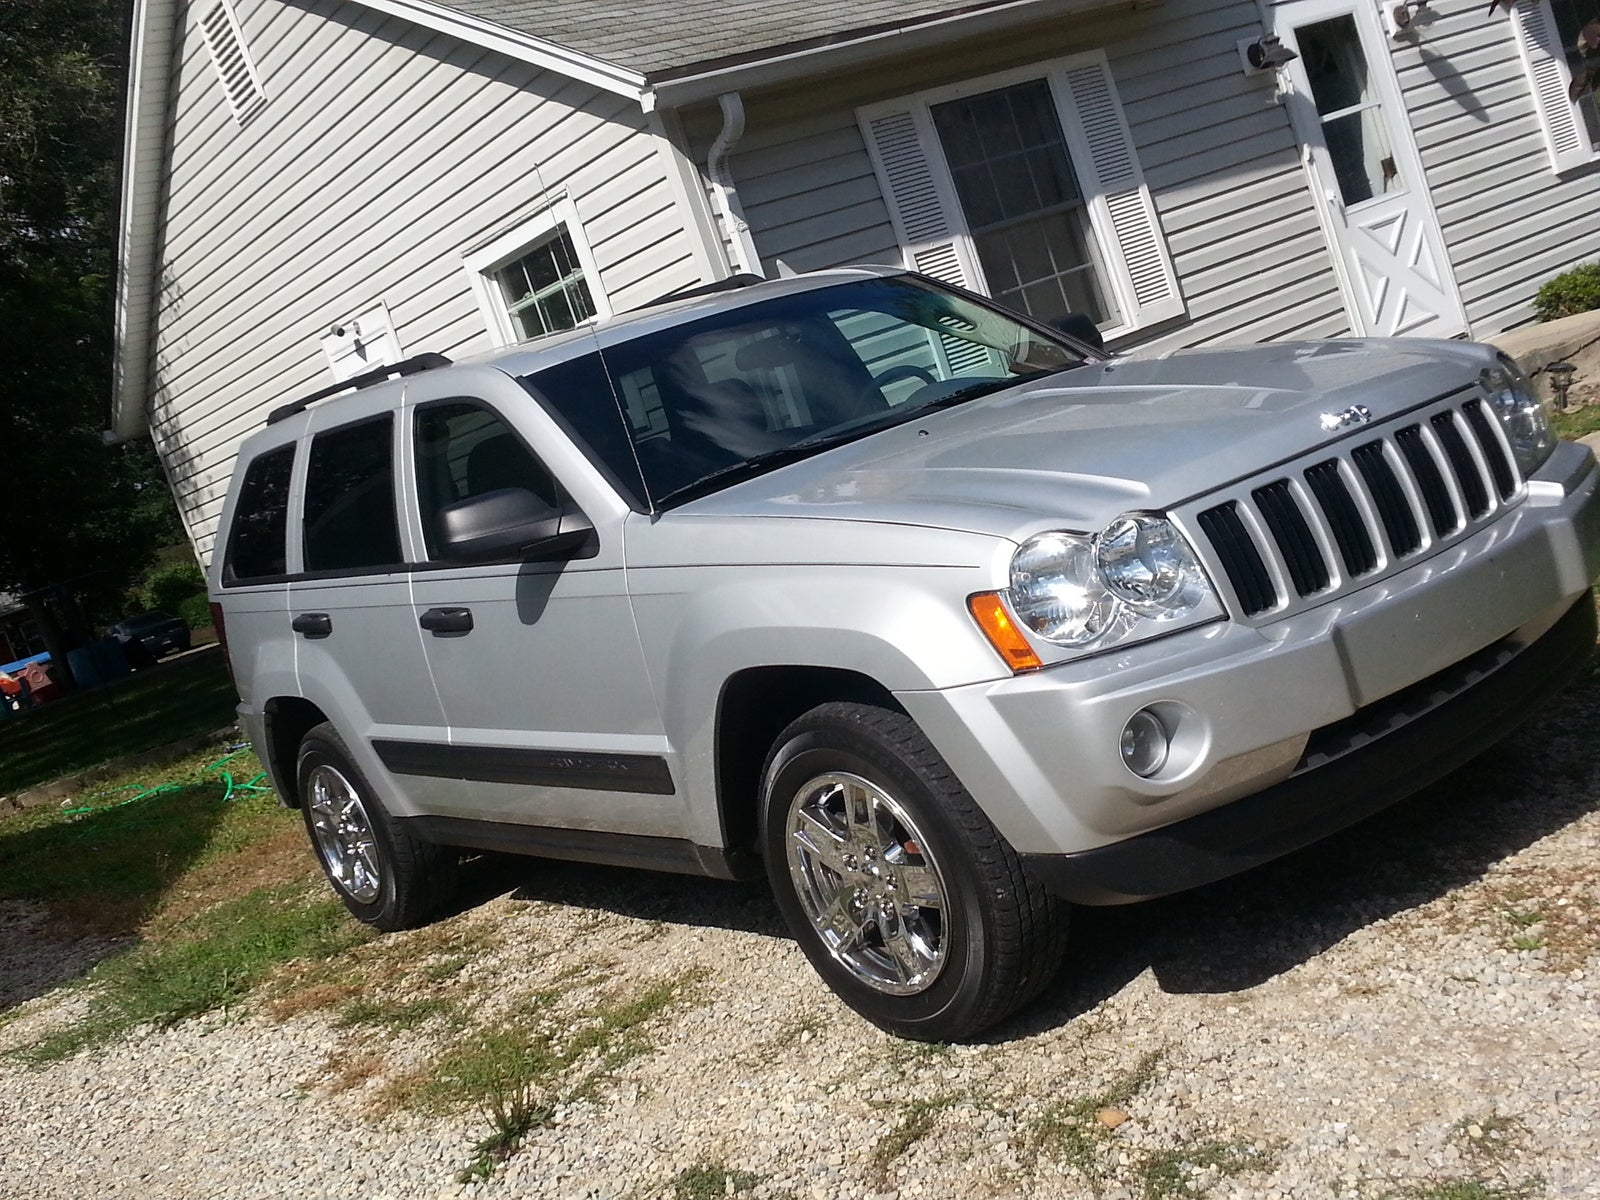 2006 Jeep Grand Cherokee Pictures CarGurus